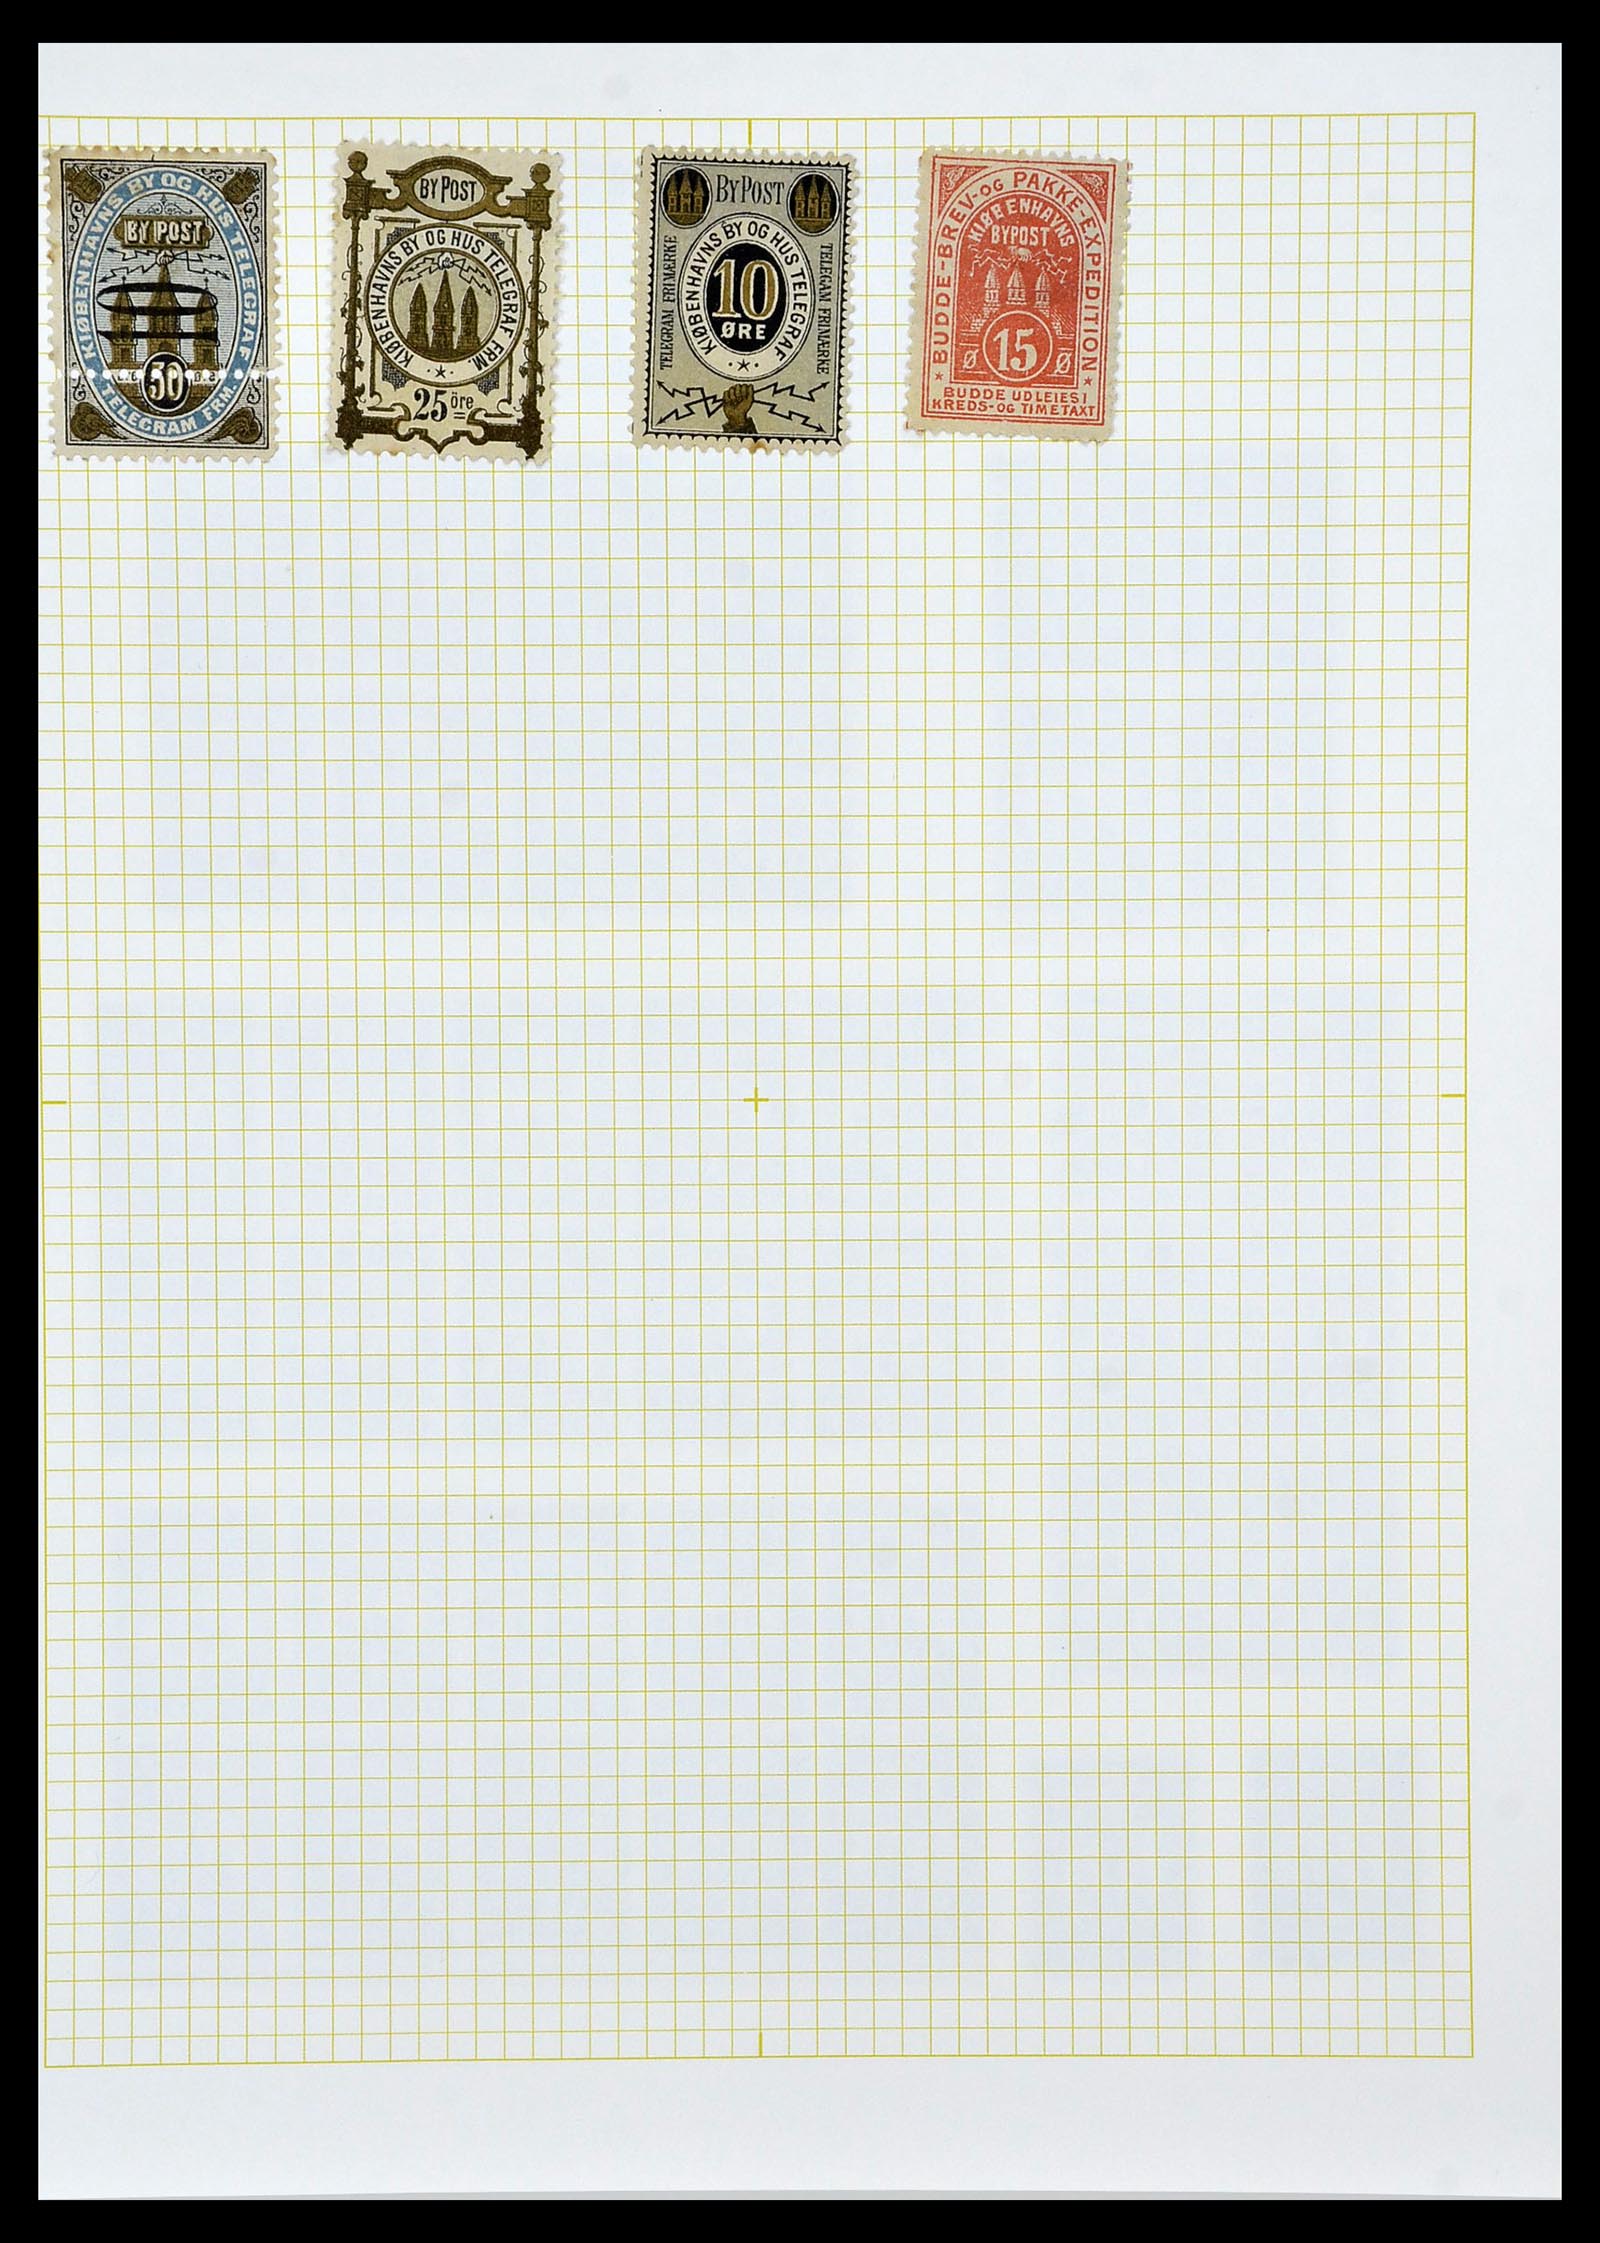 34344 010 - Stamp collection 34344 Scandinavia local post.